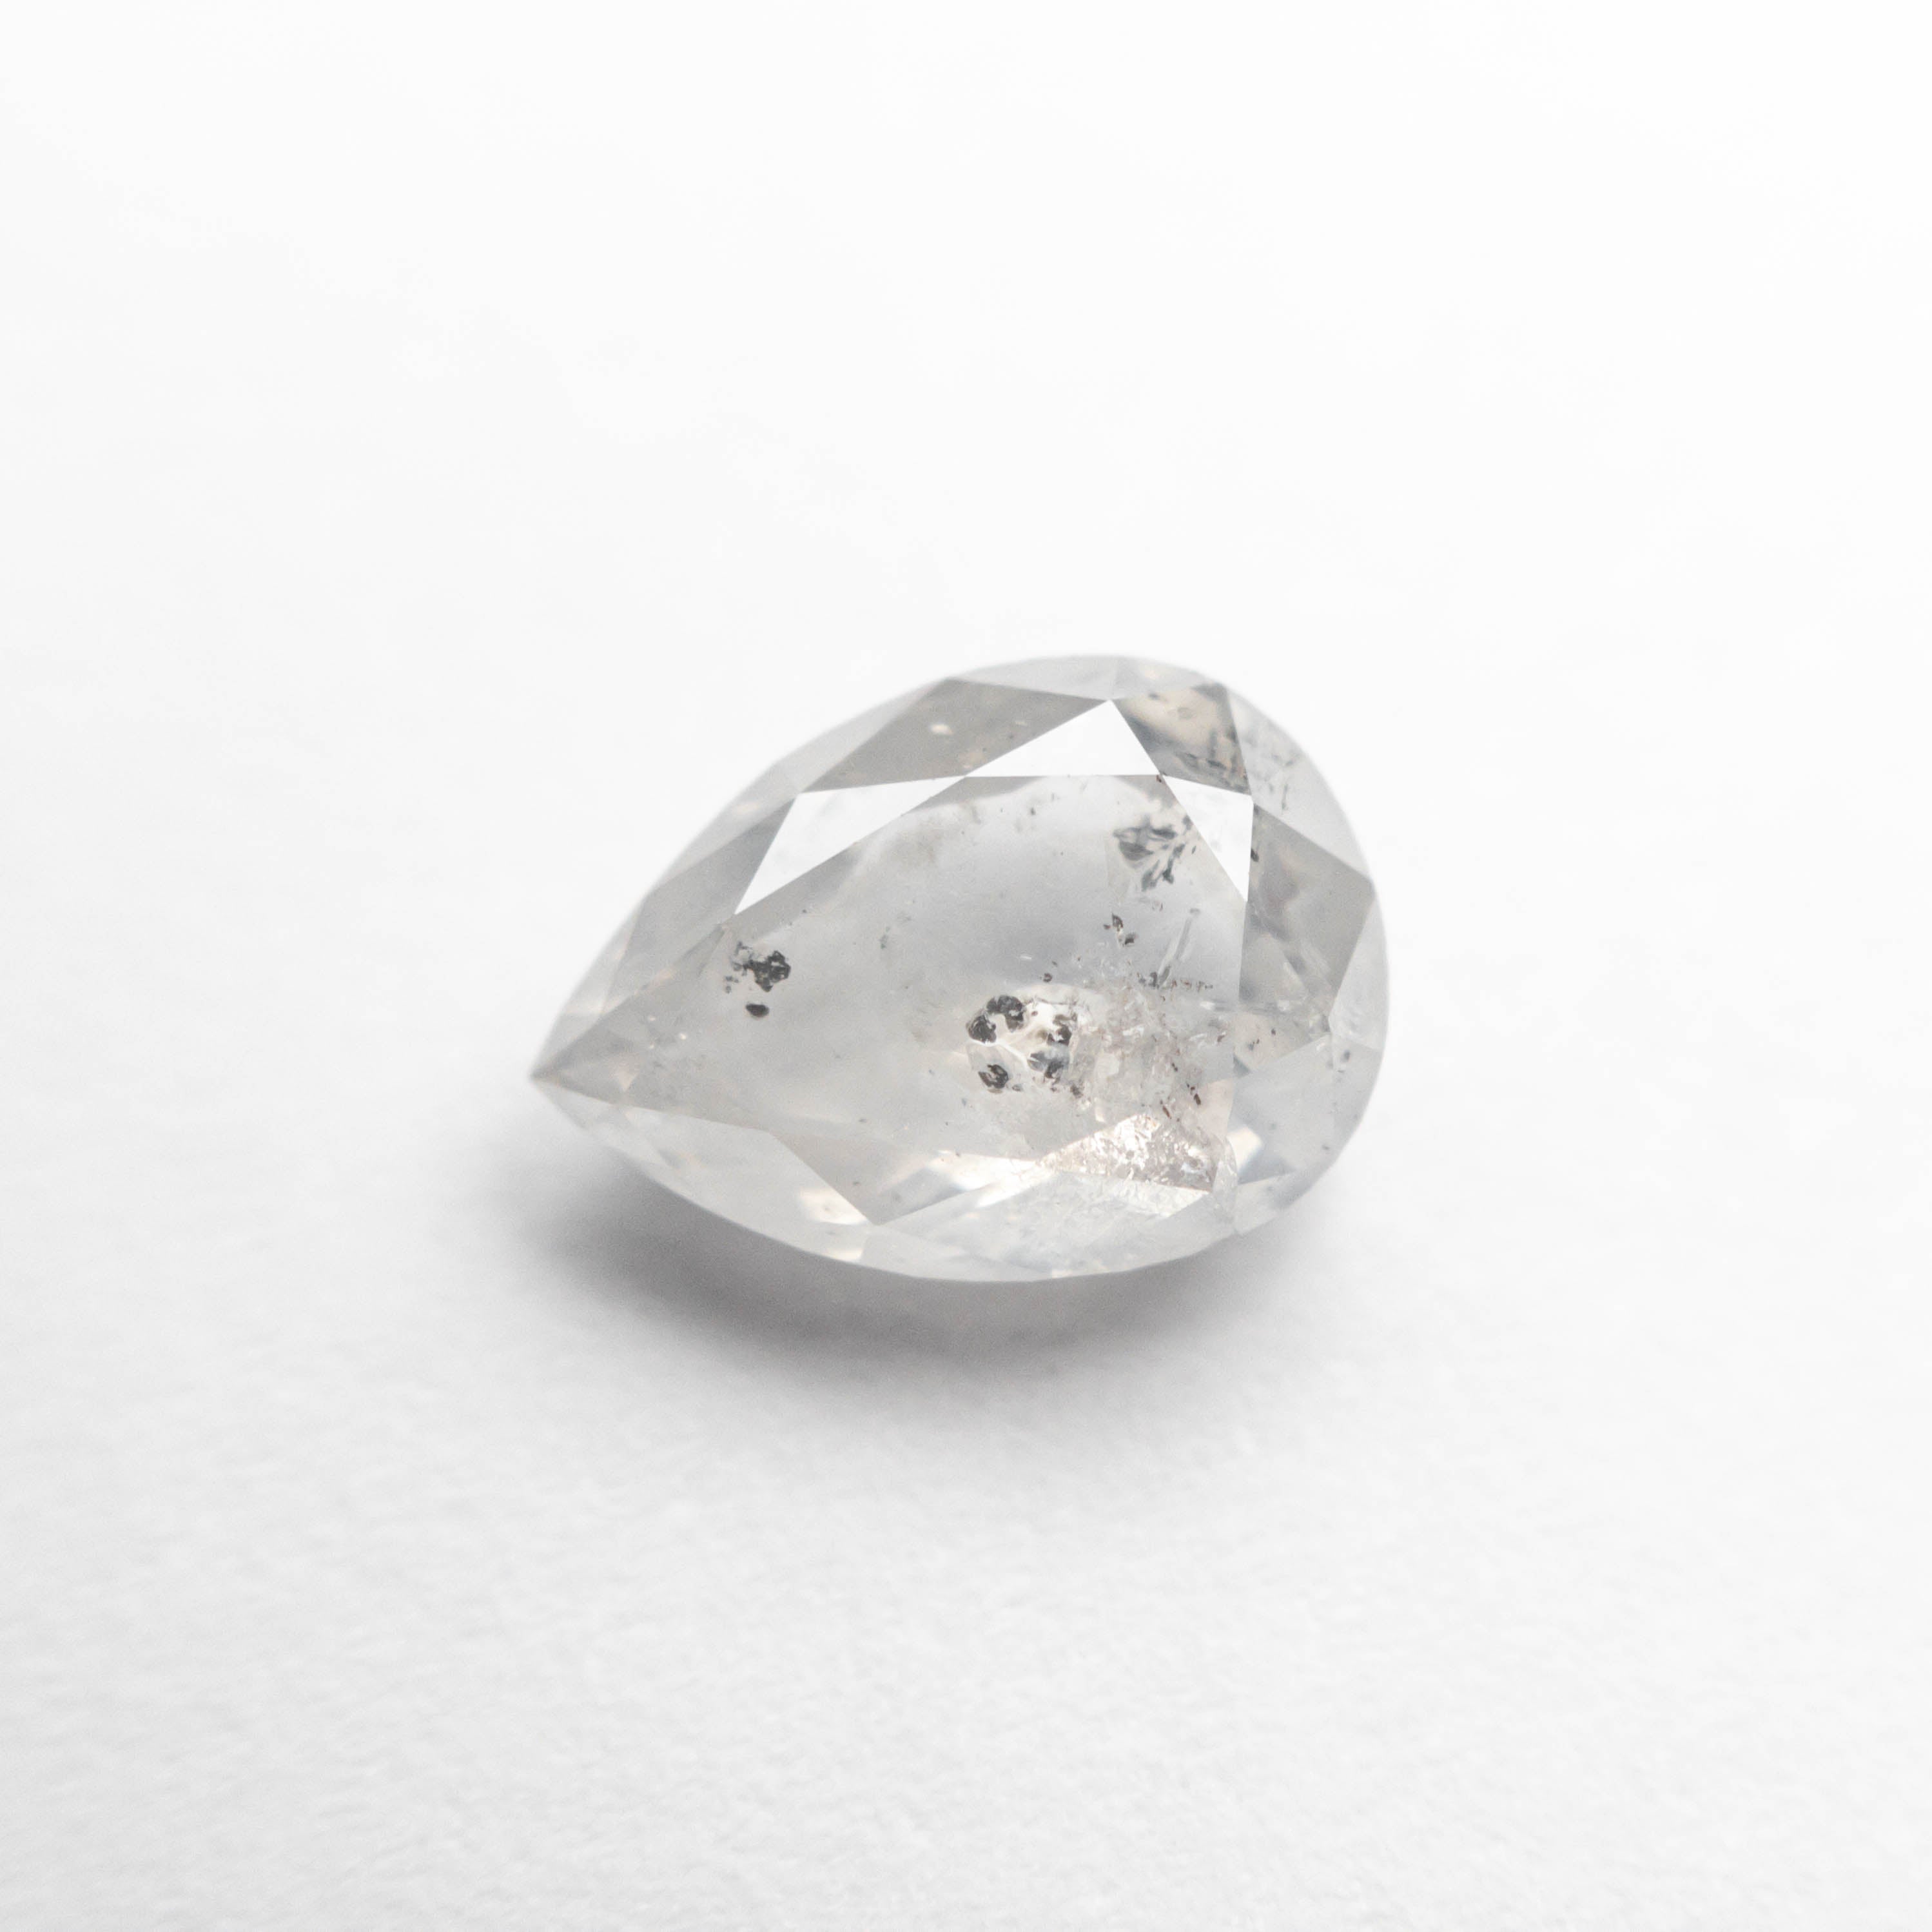 1.61ct 8.46x6.06x3.66mm Pear Double Cut 23840-11 (HOLD)